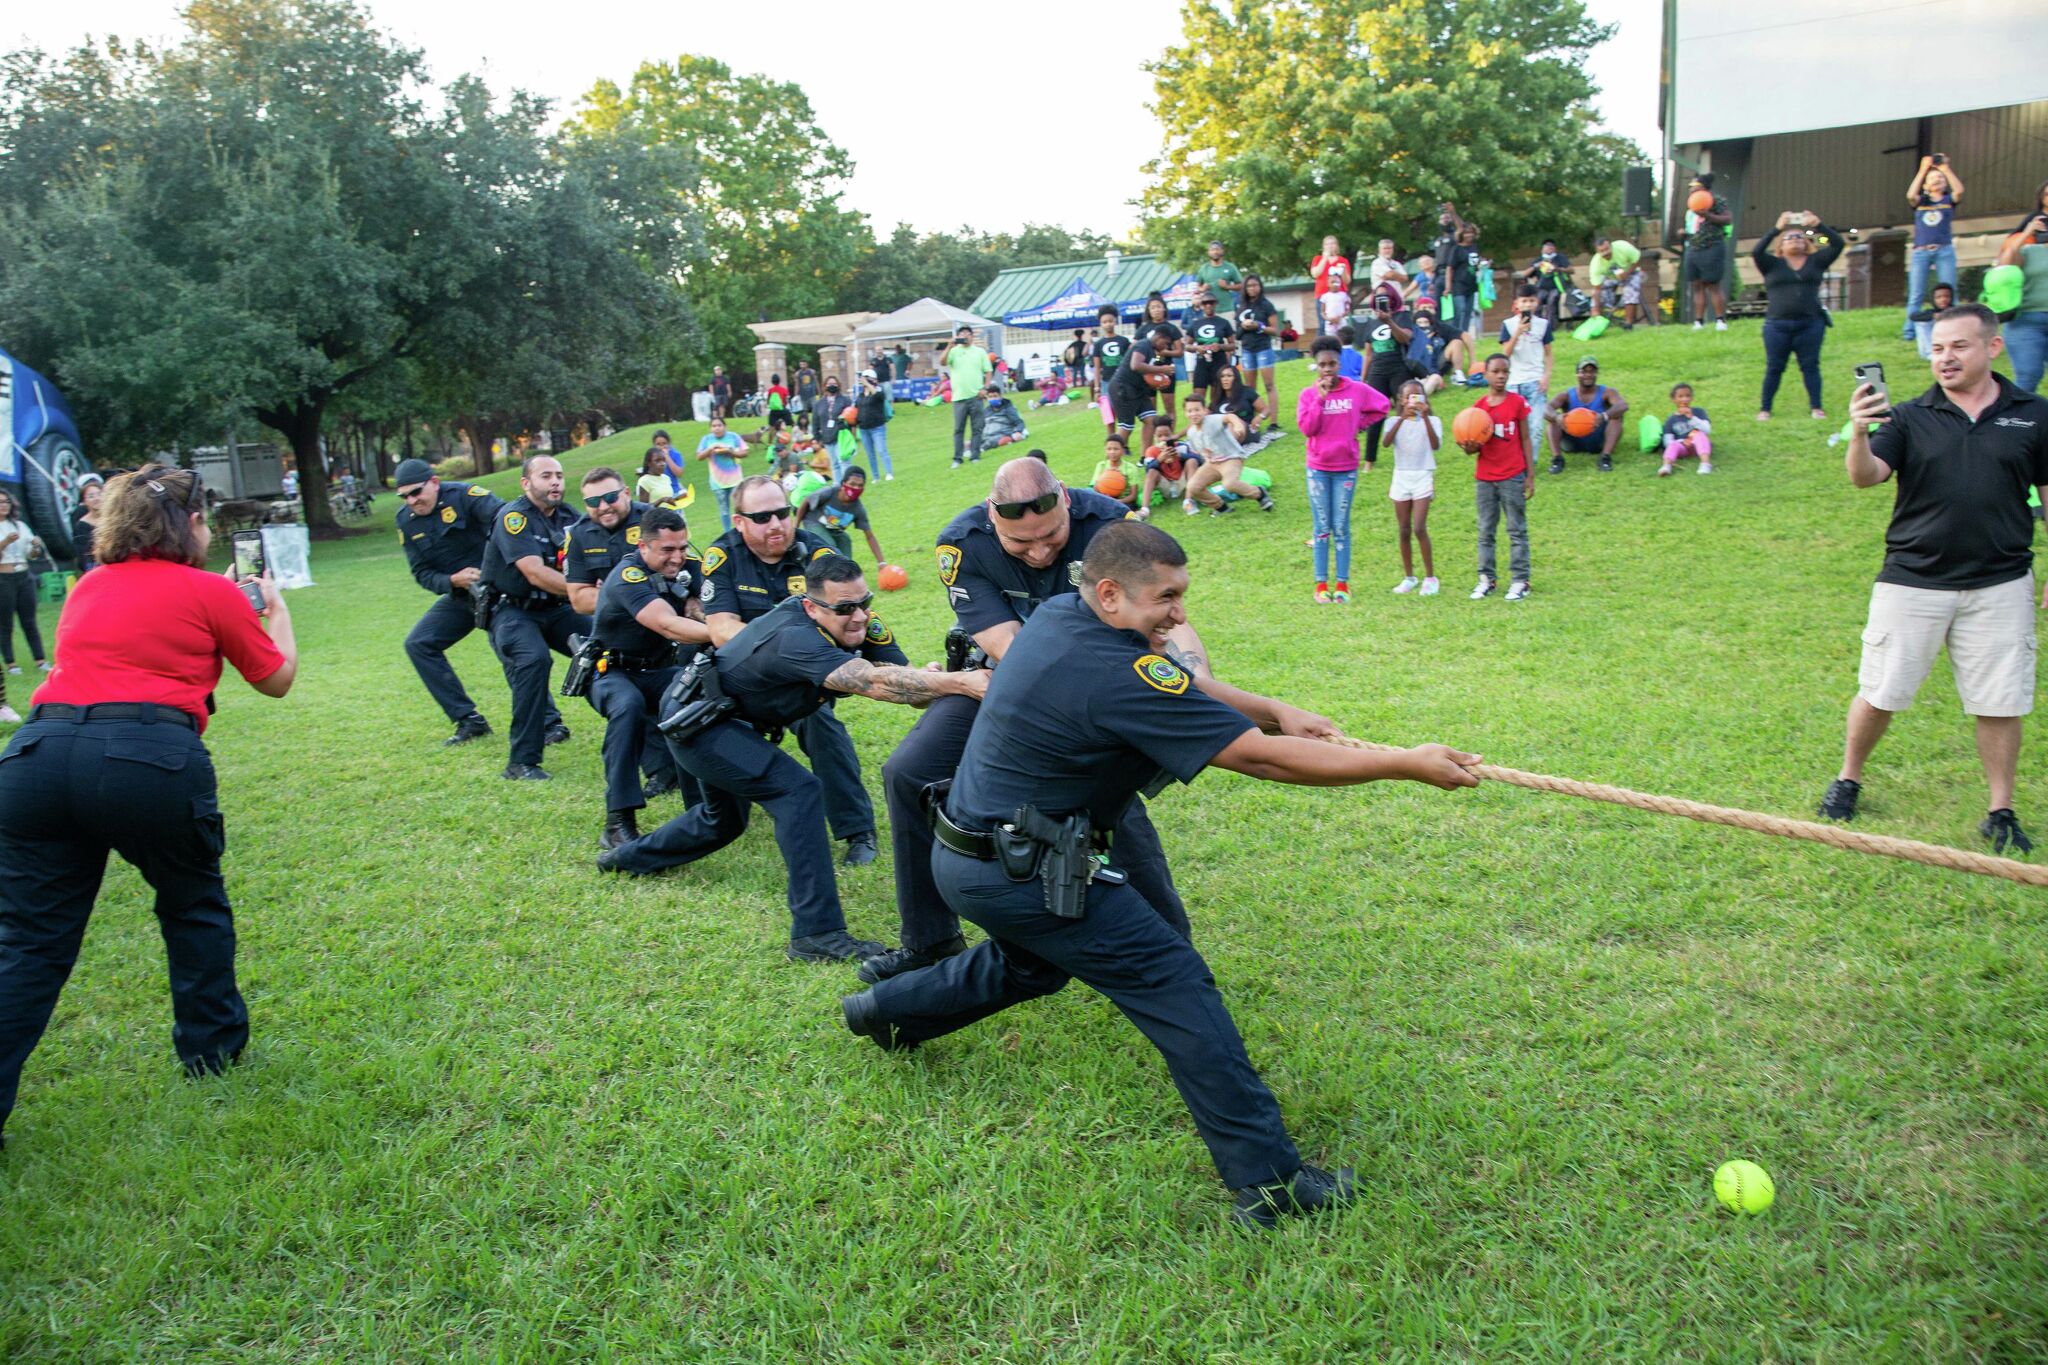 Meet law enforcement, get free Chick-Fil-A and 'epic giveaways' at north Houston National Night Out